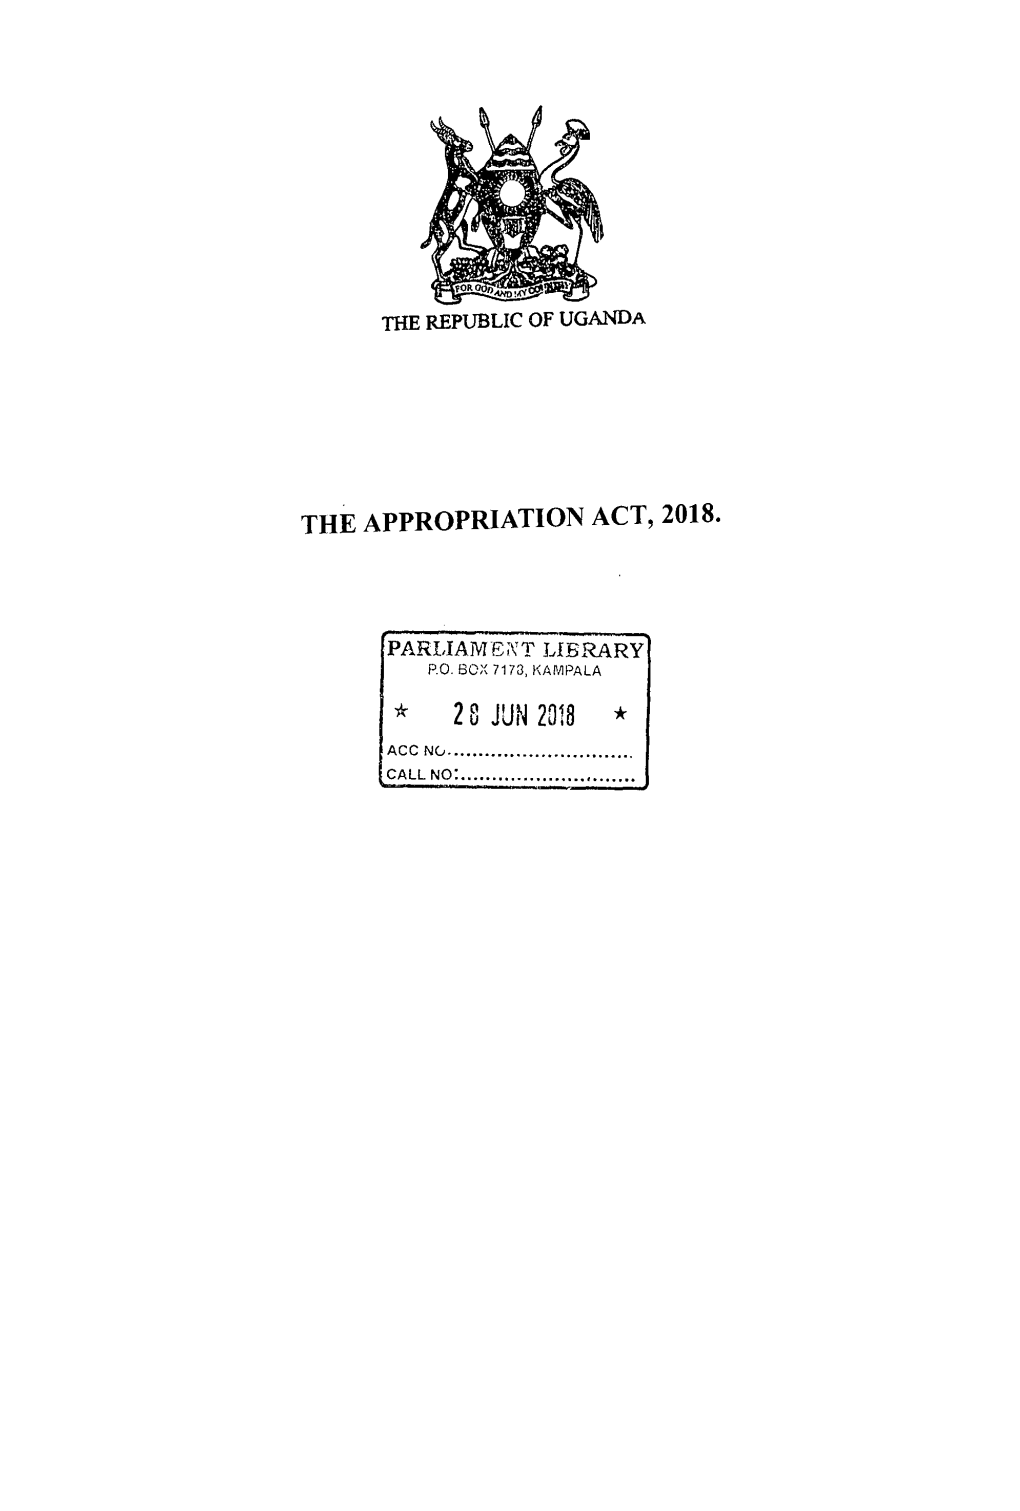 APPROPRIATION ACT, 2018.Pdf